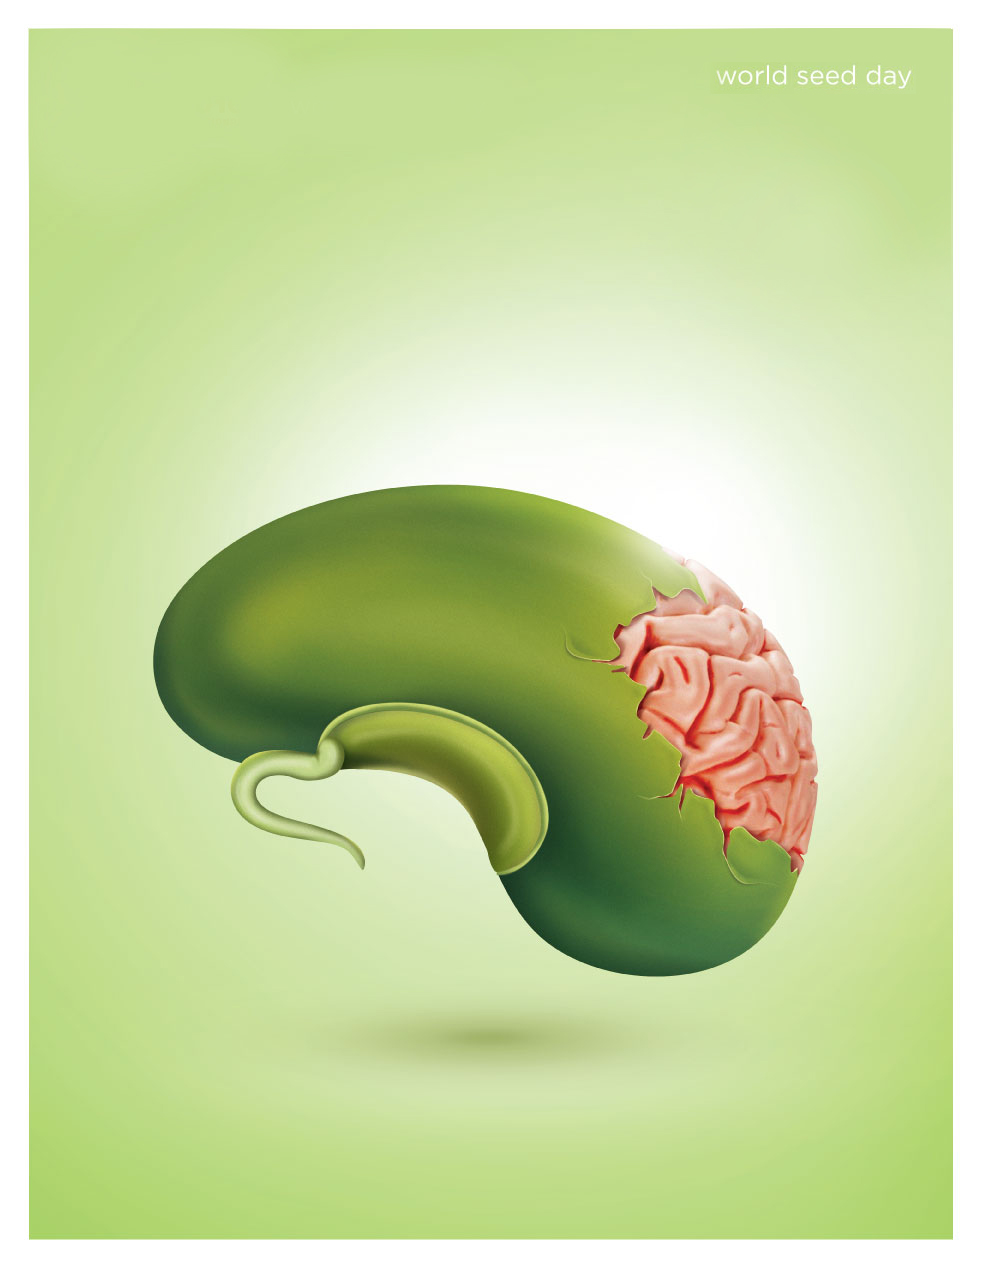 seed forest snake chappal kidney brain mother baby illustrationimage retouch manipulation